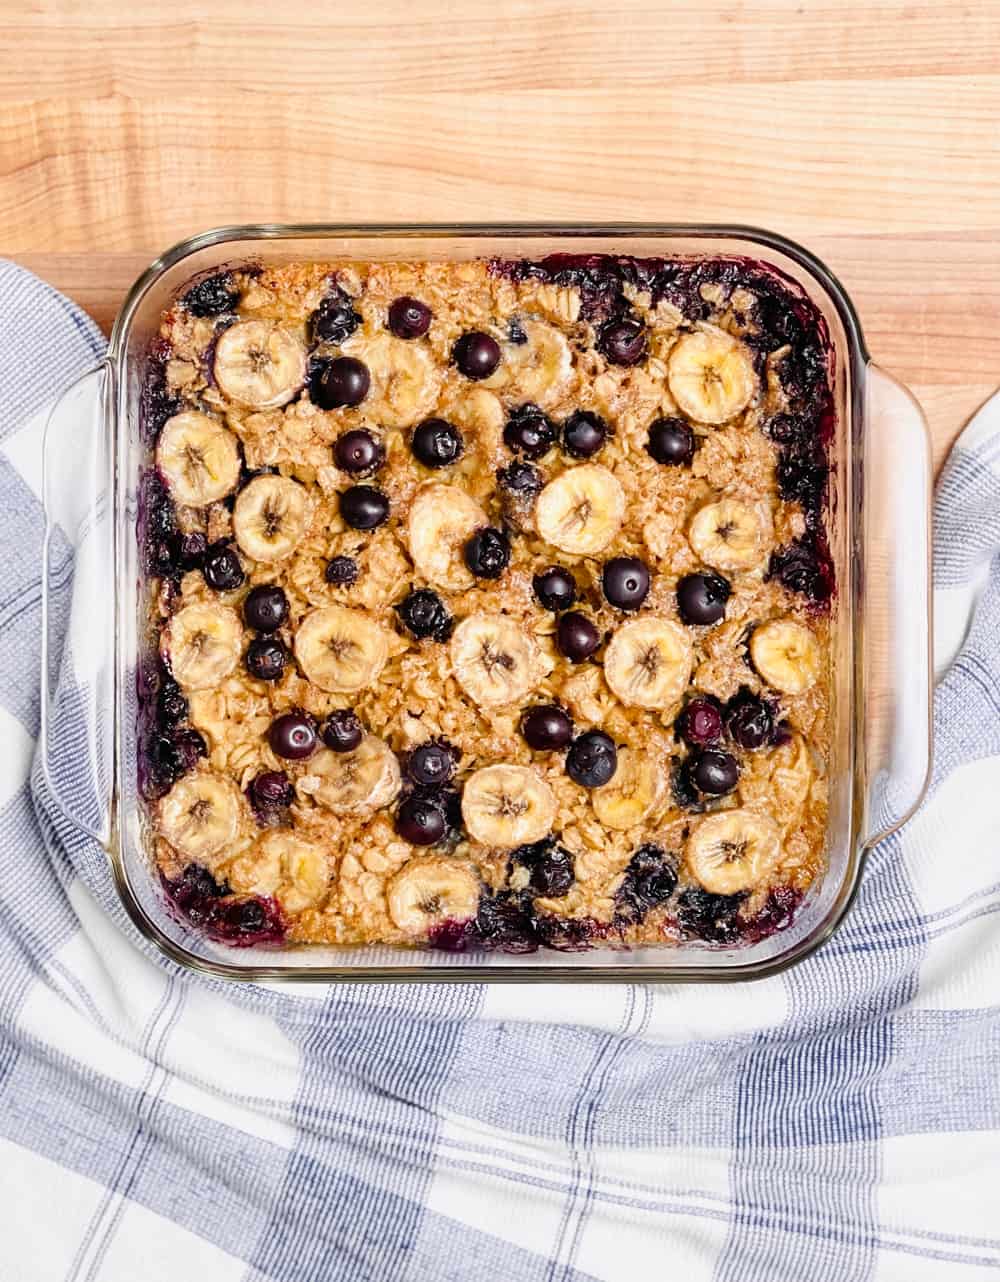 TikTok Baked Oats Recipe made with bananas and blueberries